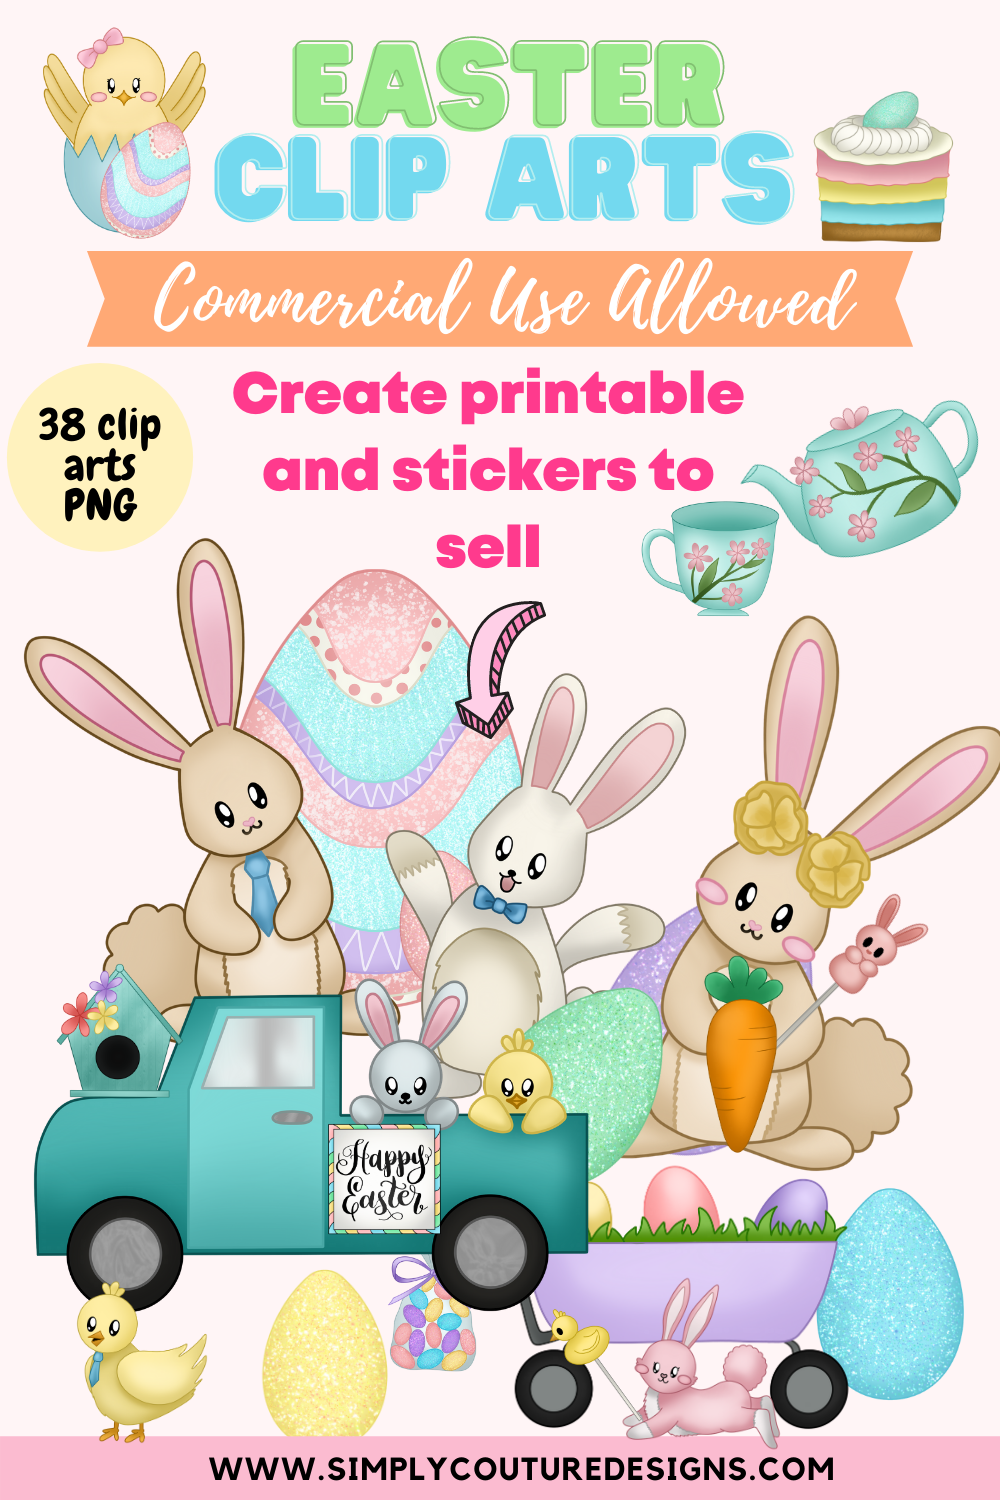 Easter clip arts to create printables to sell